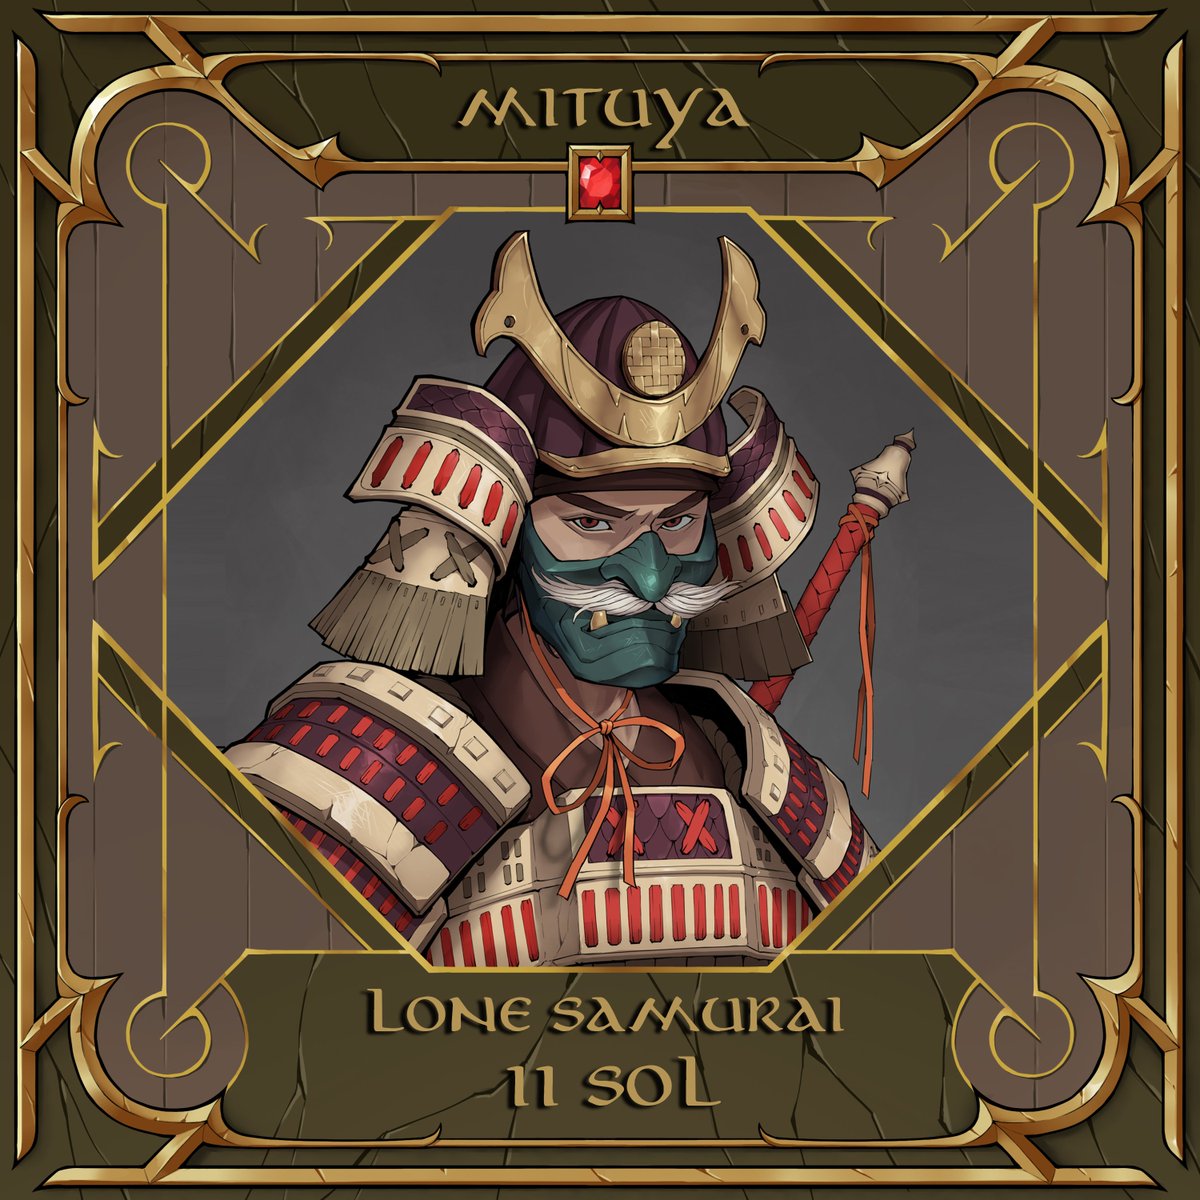 Mituya Lone Samurai was acquired for 11 SOL  

Welcome @Mr_AskAbout to a gathering of the most prominent adventurers in the Meta Story    

Our story is just starting! 📖